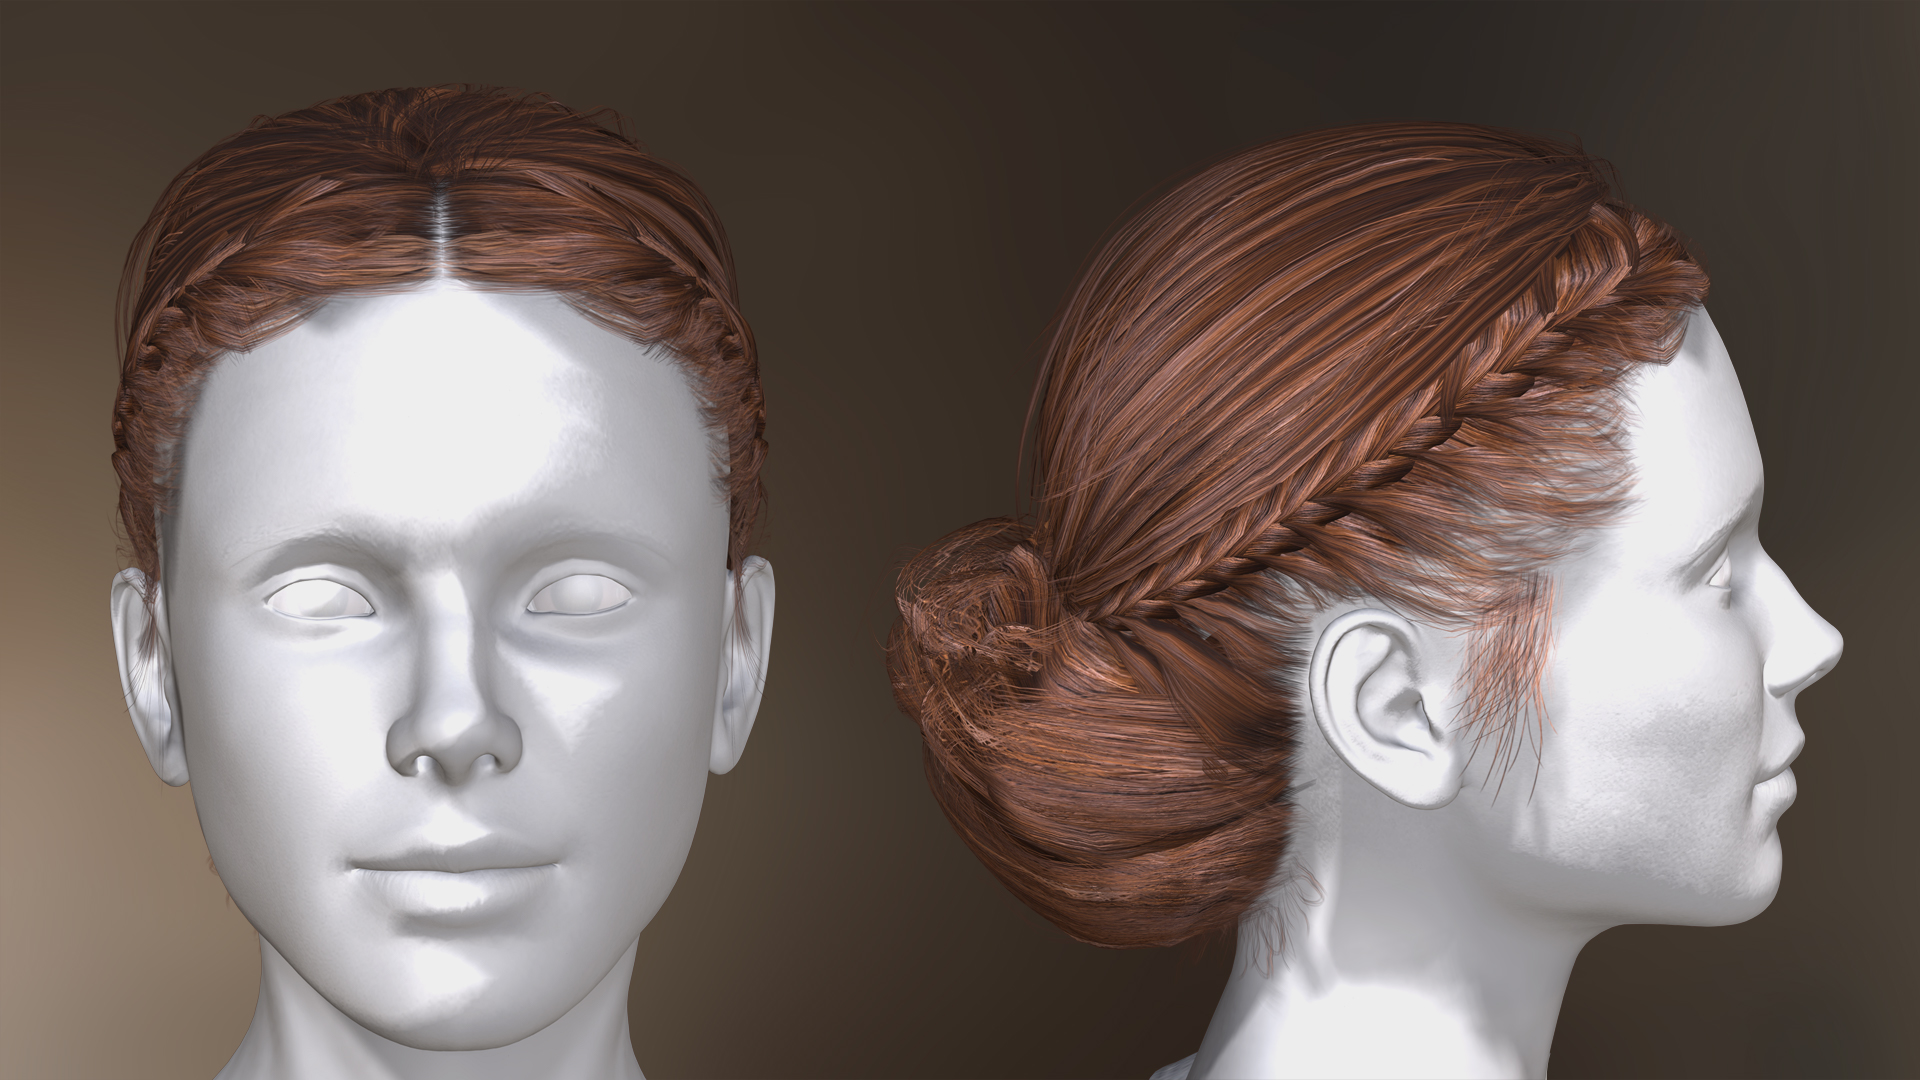 dragon age 2 hairstyles